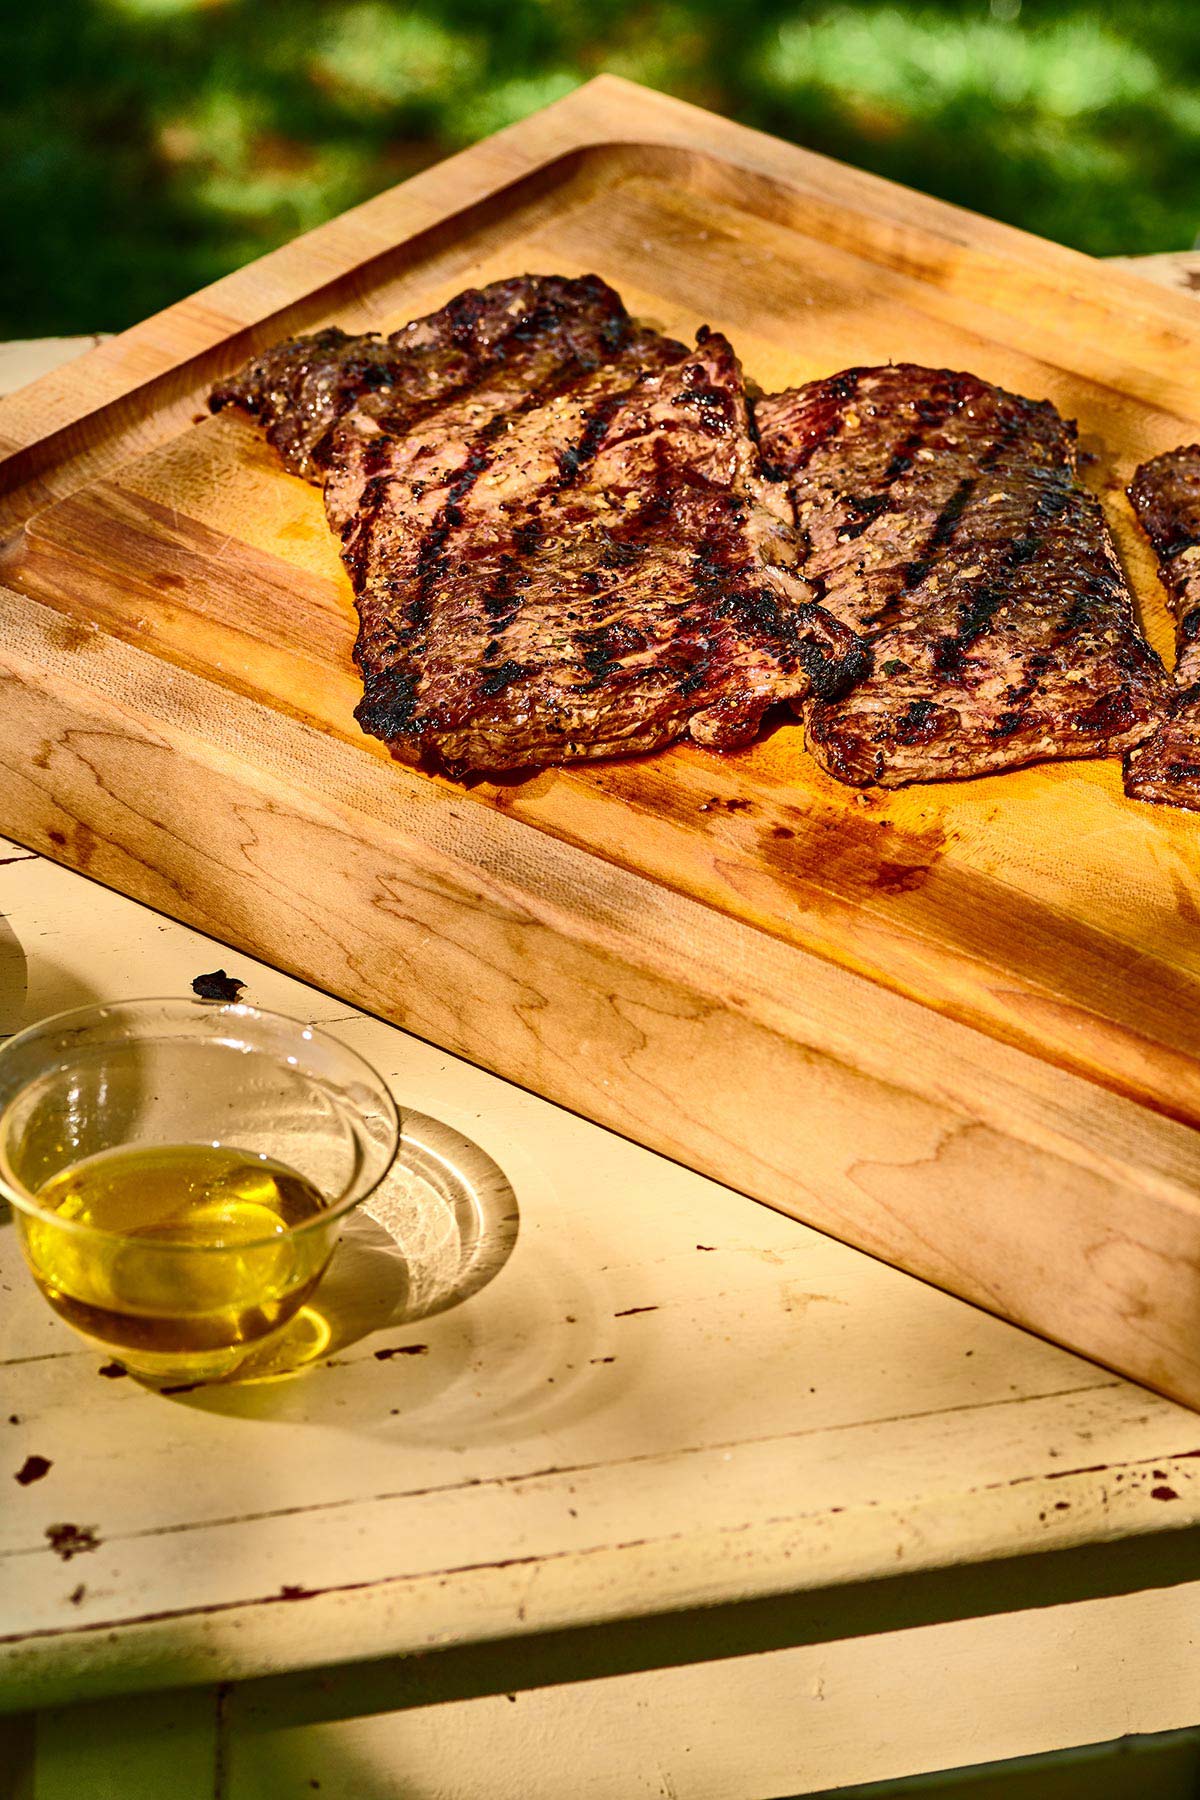 Grilled skirt steaks on a wooden cutting board.